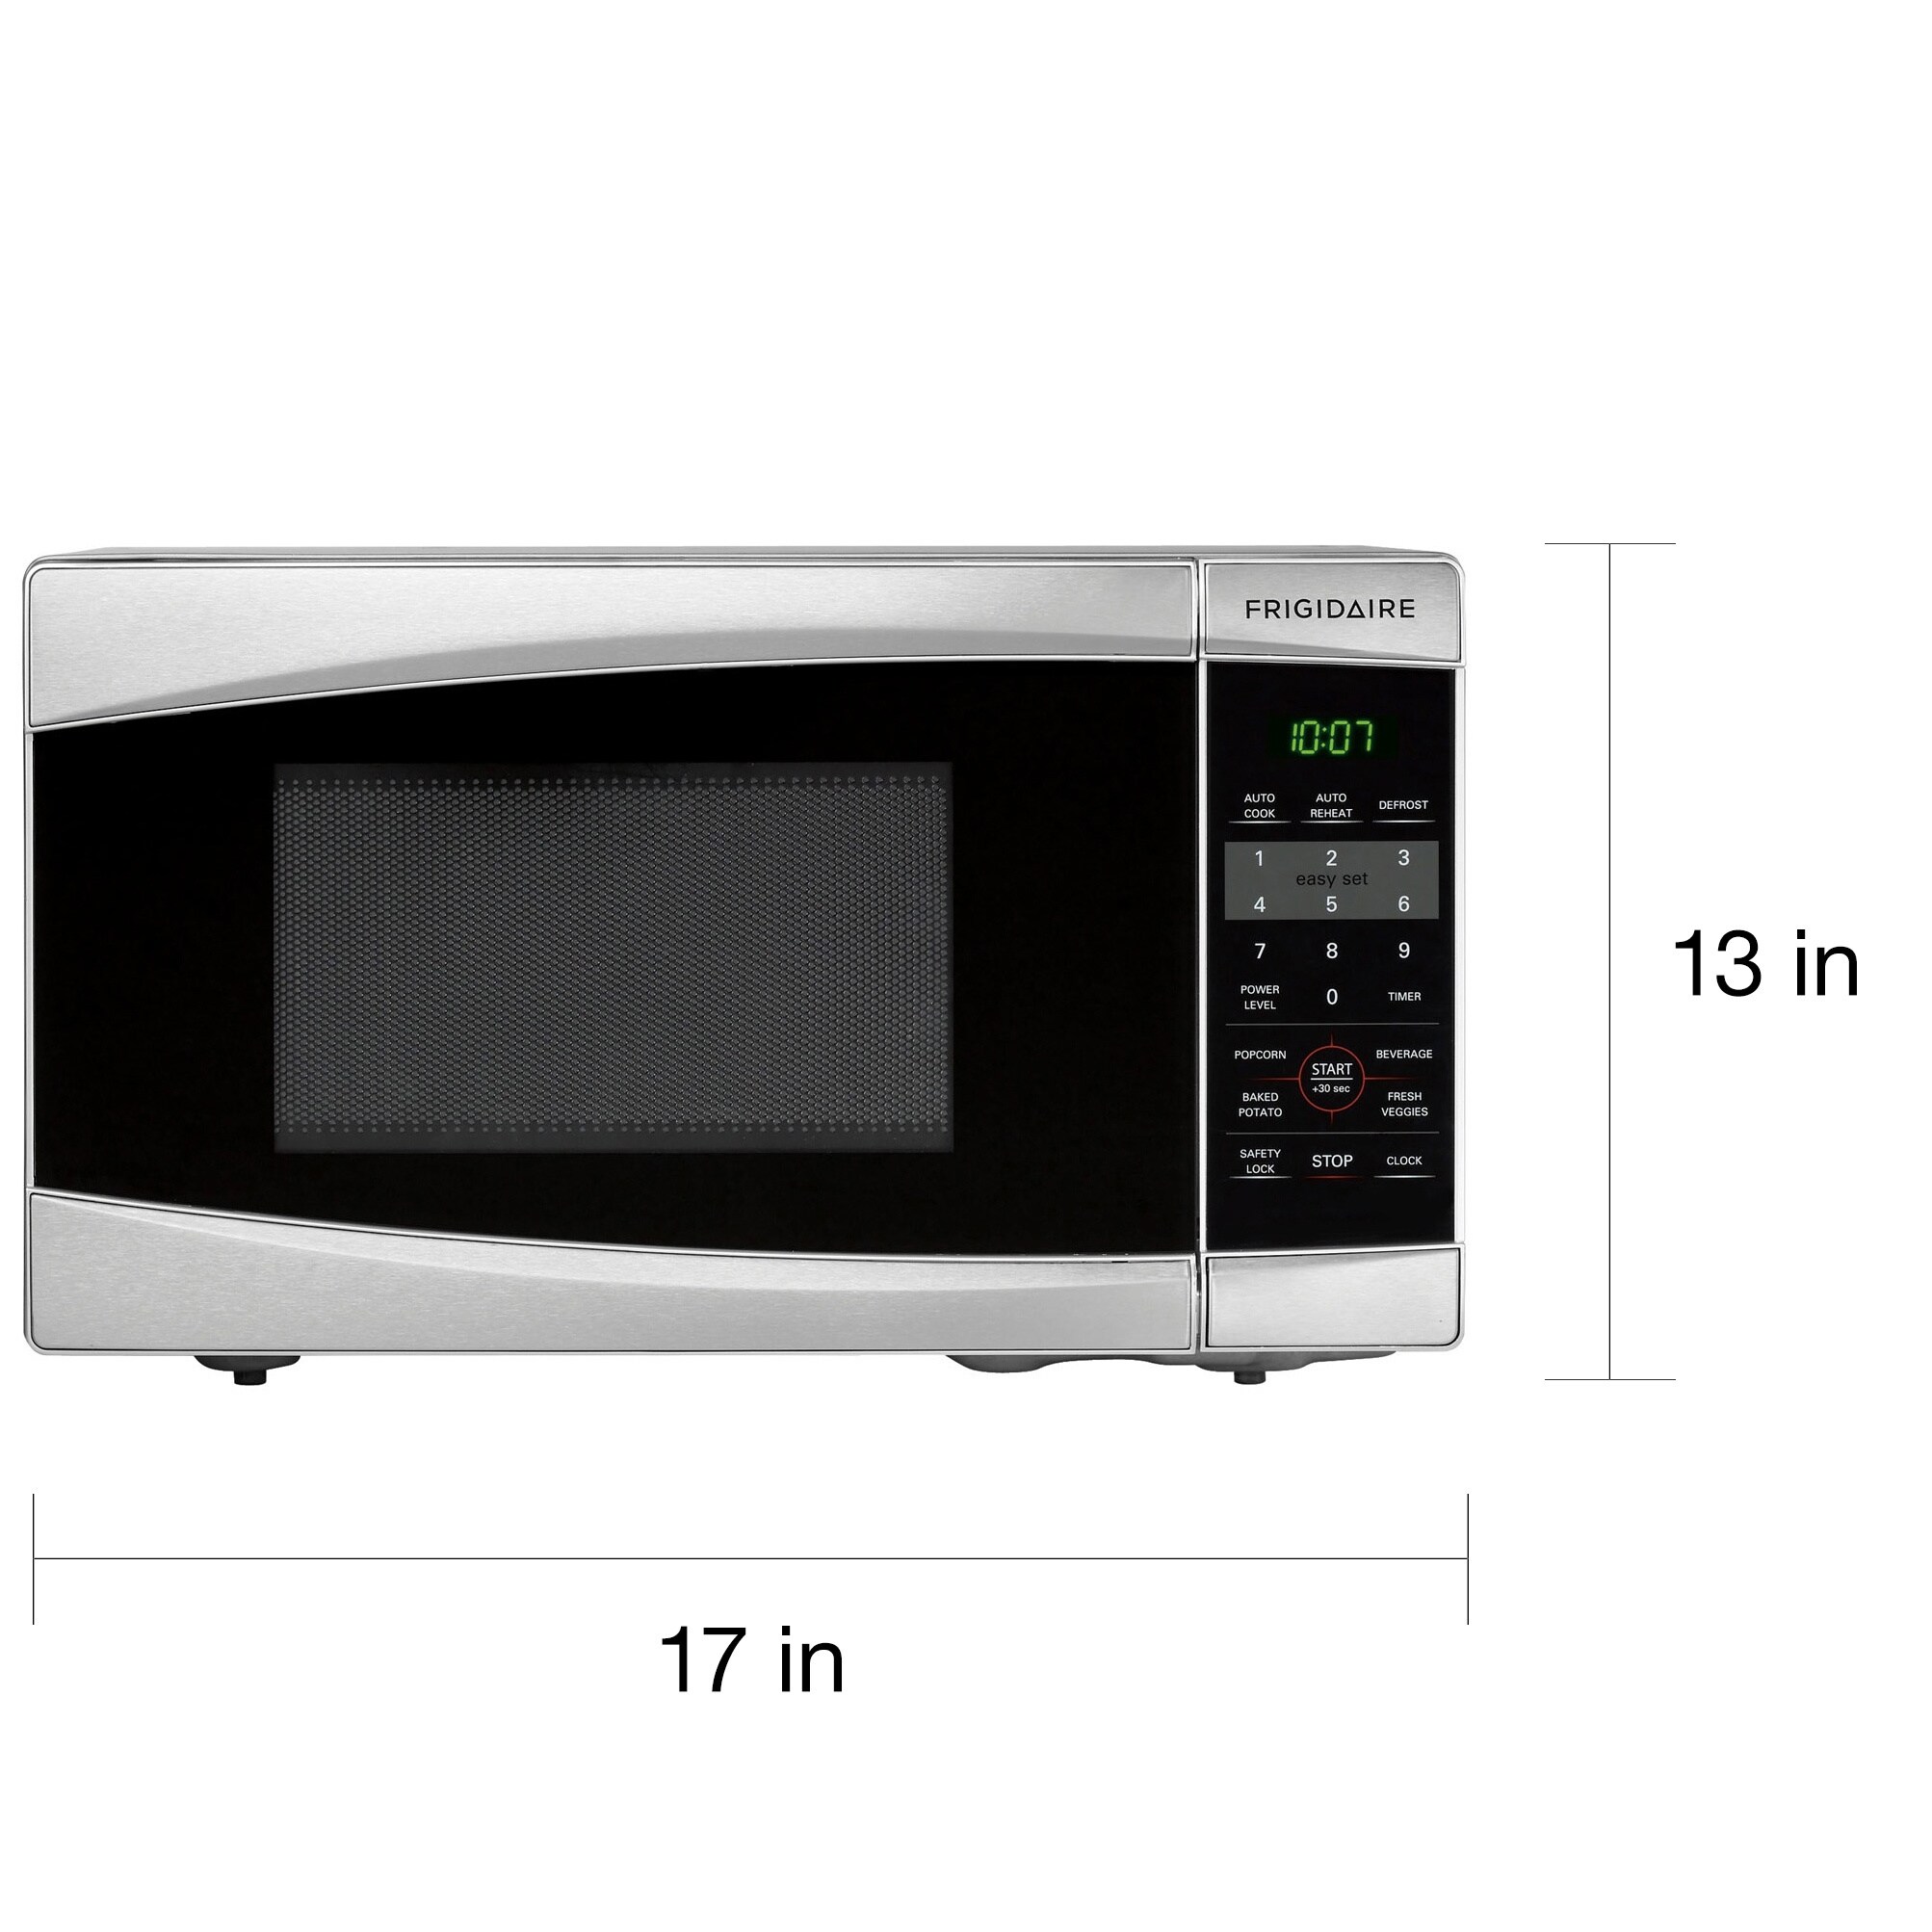 Frigidaire 0.7 Cu. Ft. Compact Microwave White FFCM0724LW - Best Buy